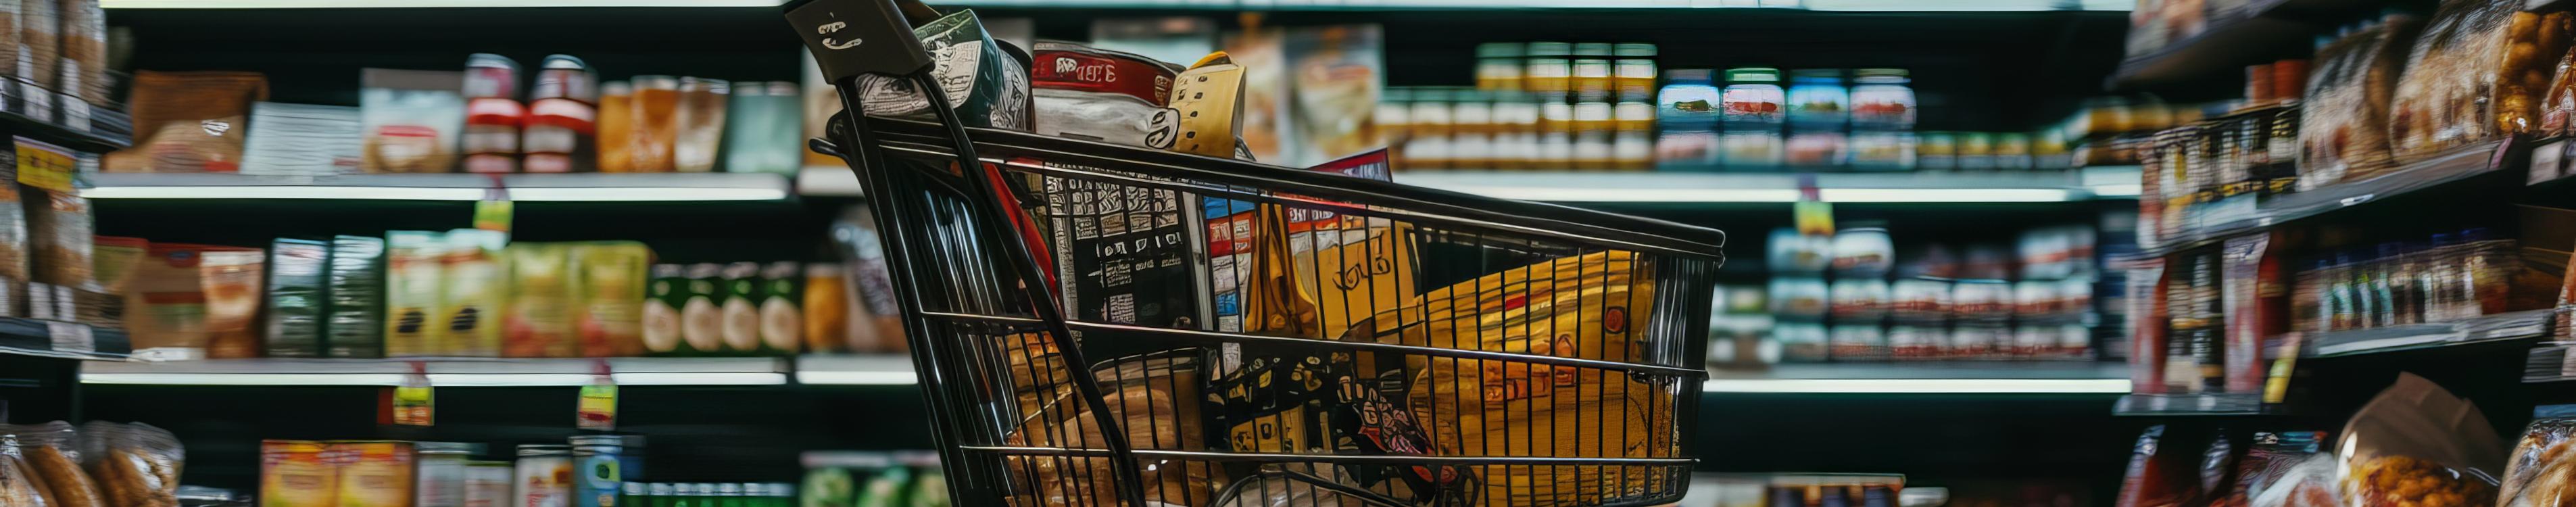 Shopping cart and shelves of products in a store (royalty free image from Pixabay)